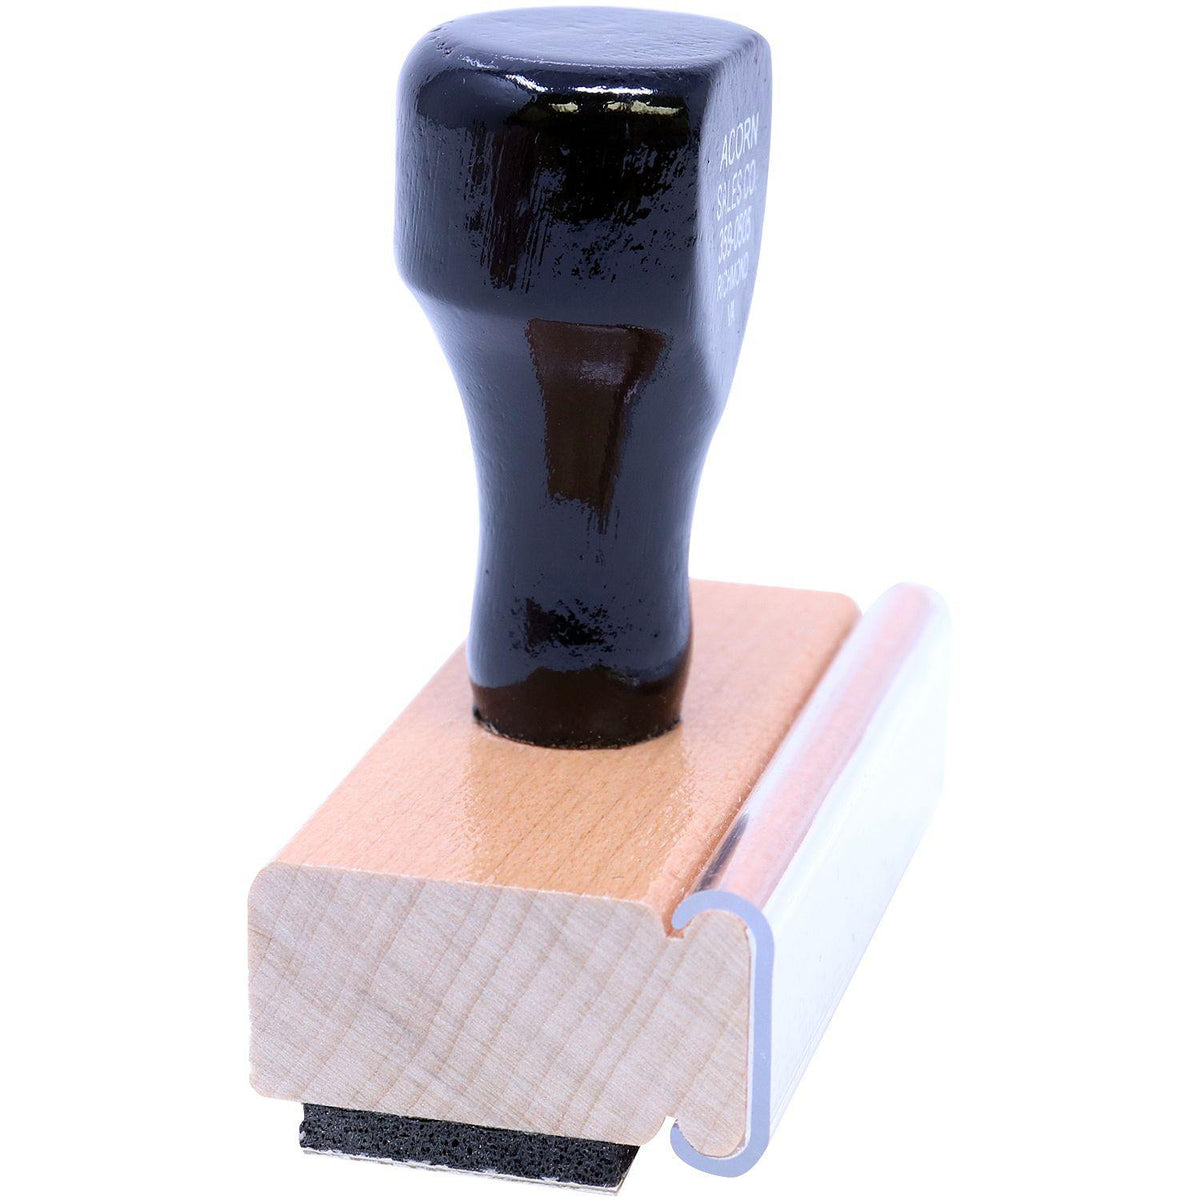 Side View of Large Closed Rubber Stamp at an Angle